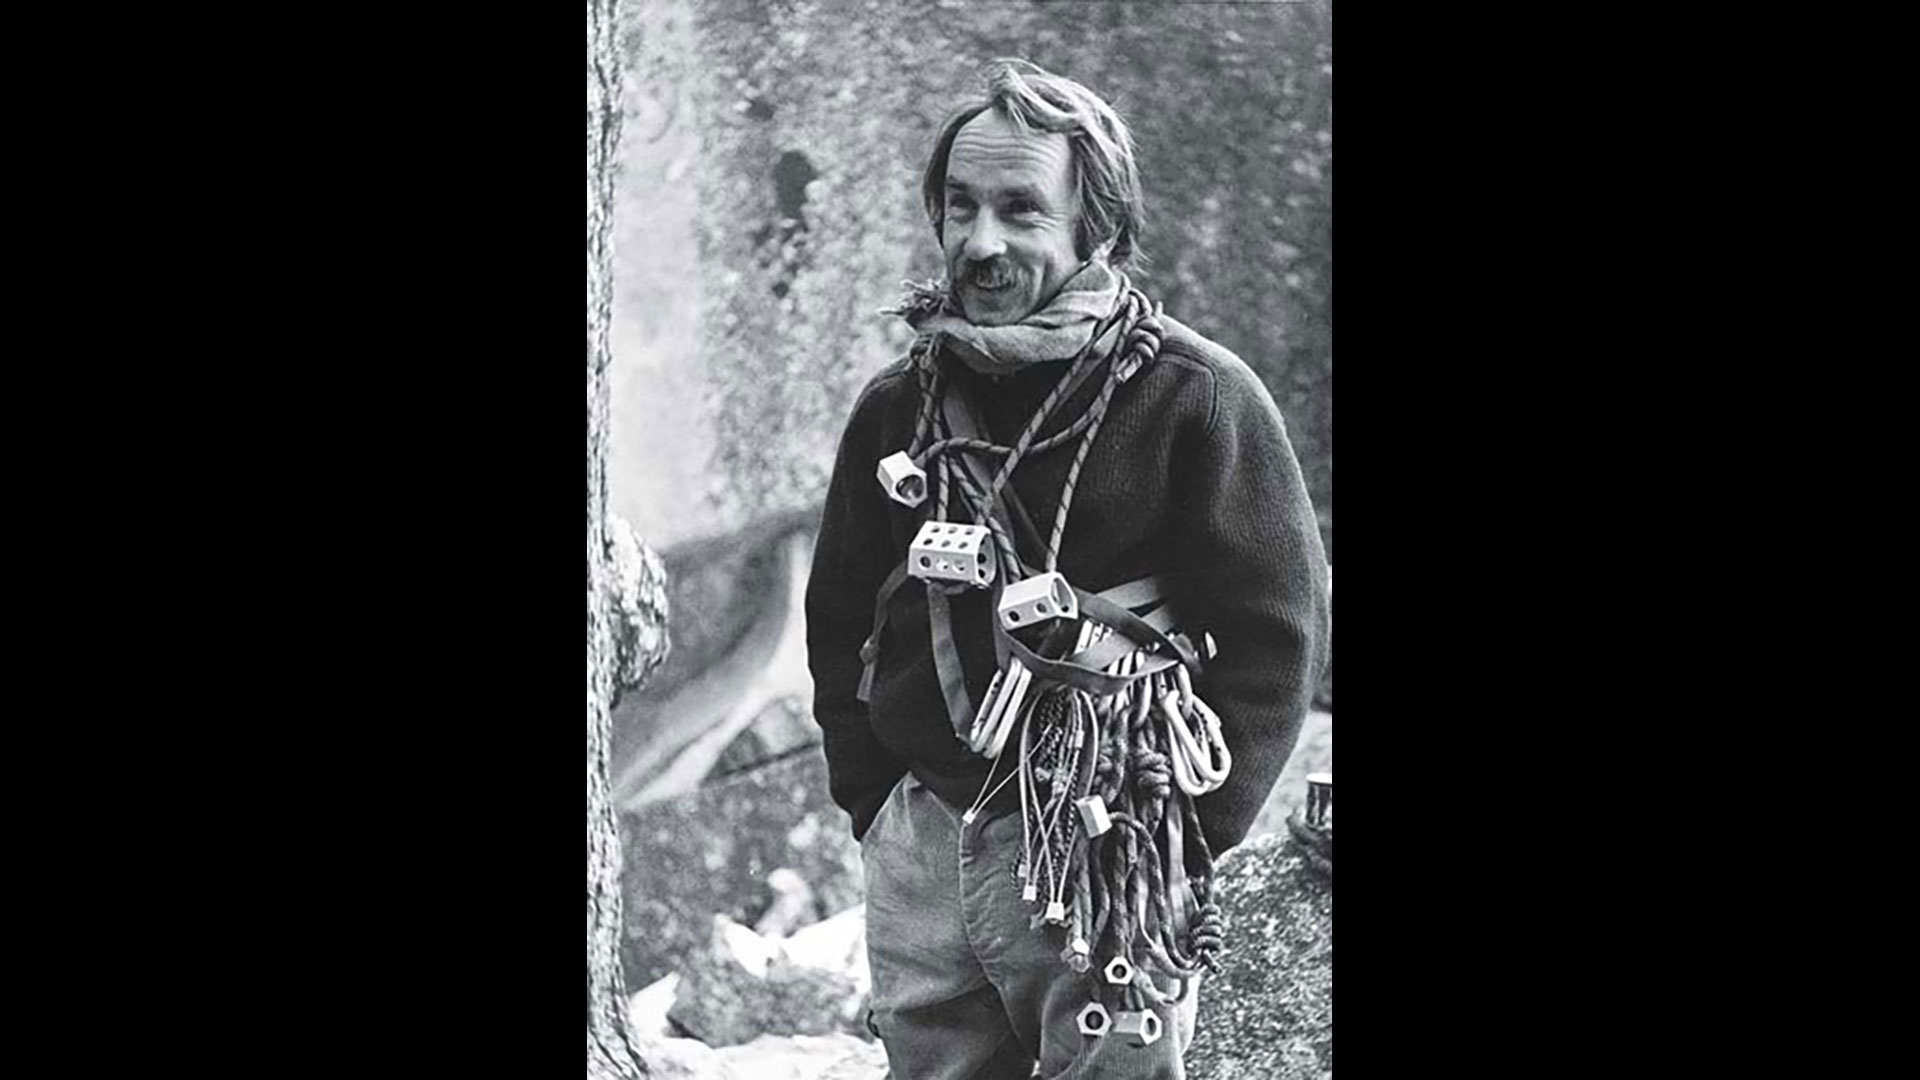 Yvon Chouinard up in the mountains with climbing gear around his neck.